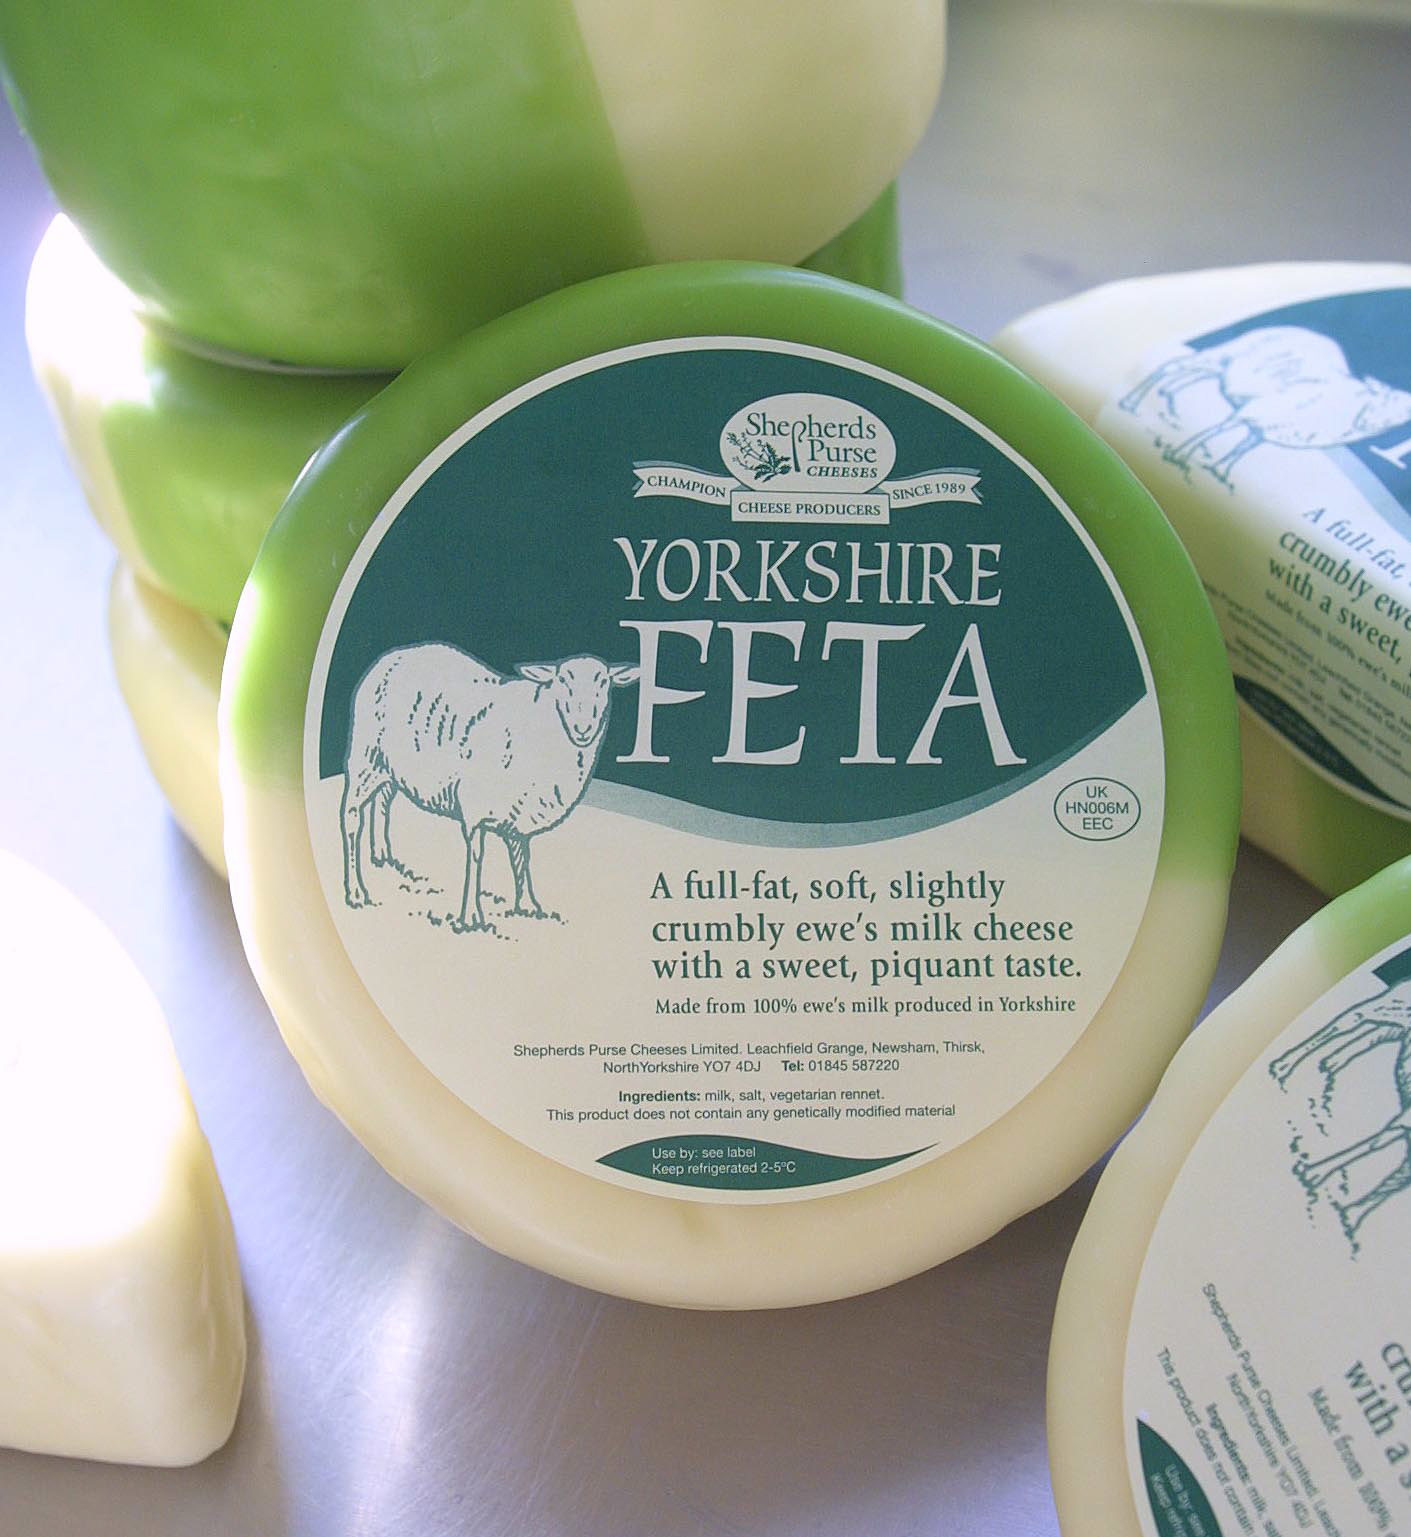 Yorkshire Feta cheese will get its third name next week 